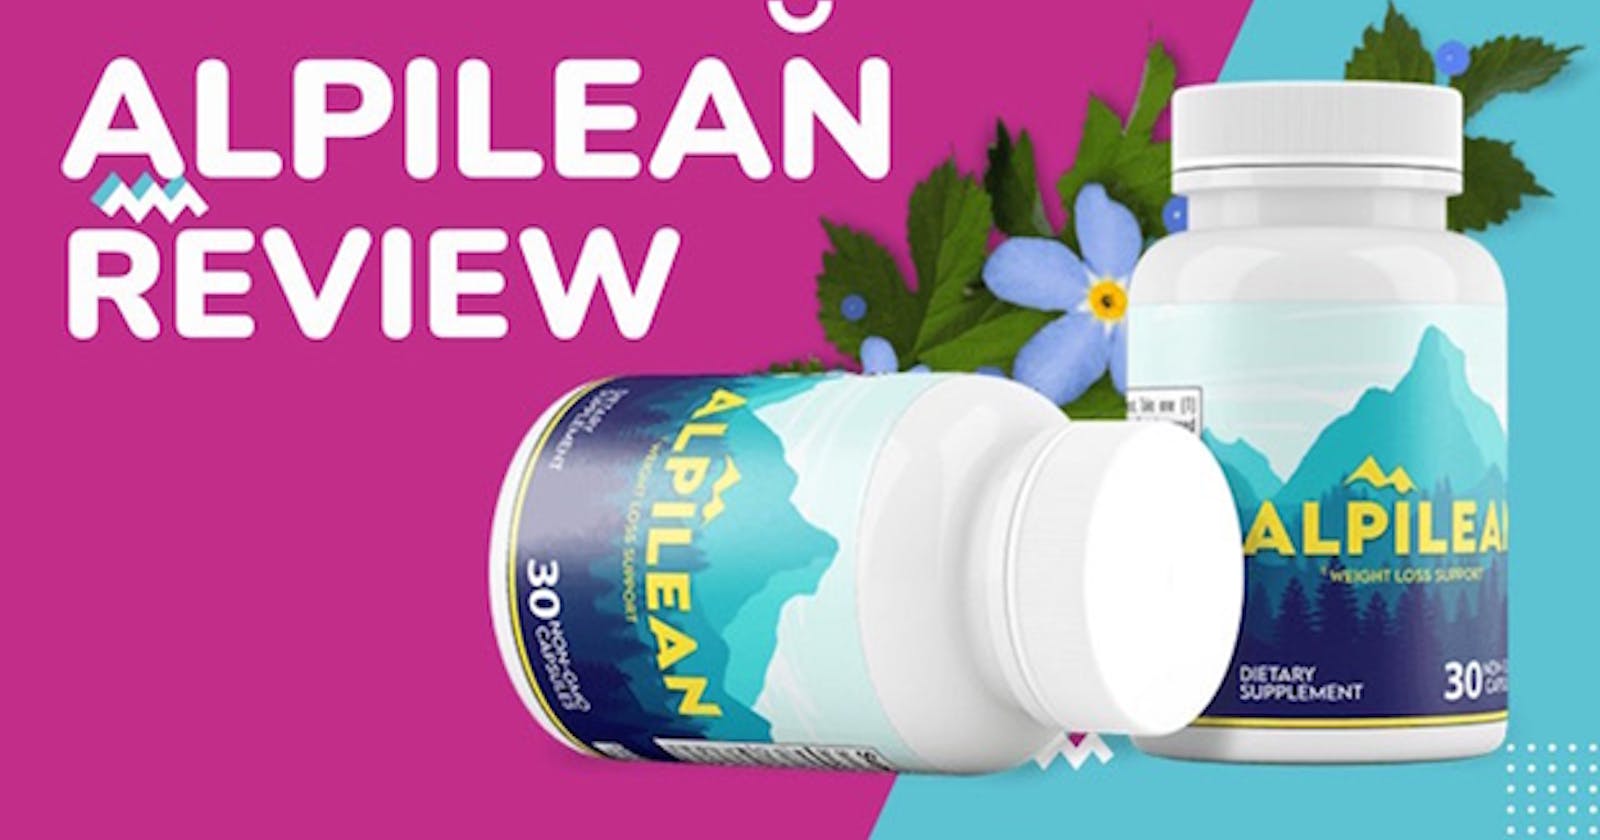 Is Alpilean Official Reviews Bogus? Read Its Working And Results And BUY